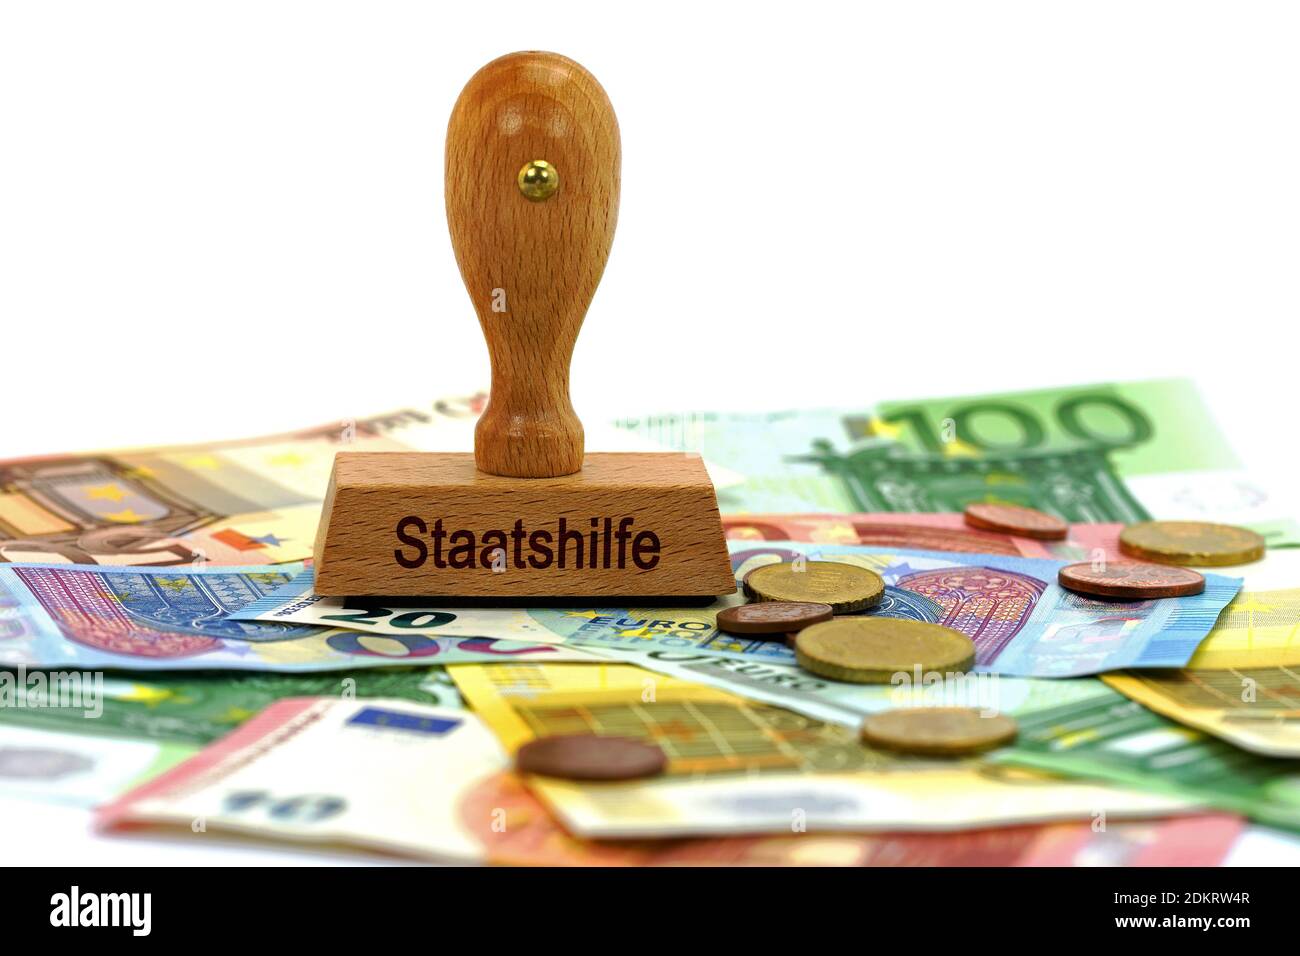 Stamp with the word 'Staatshilfe' on banknotes, translation 'State Aid' Stock Photo